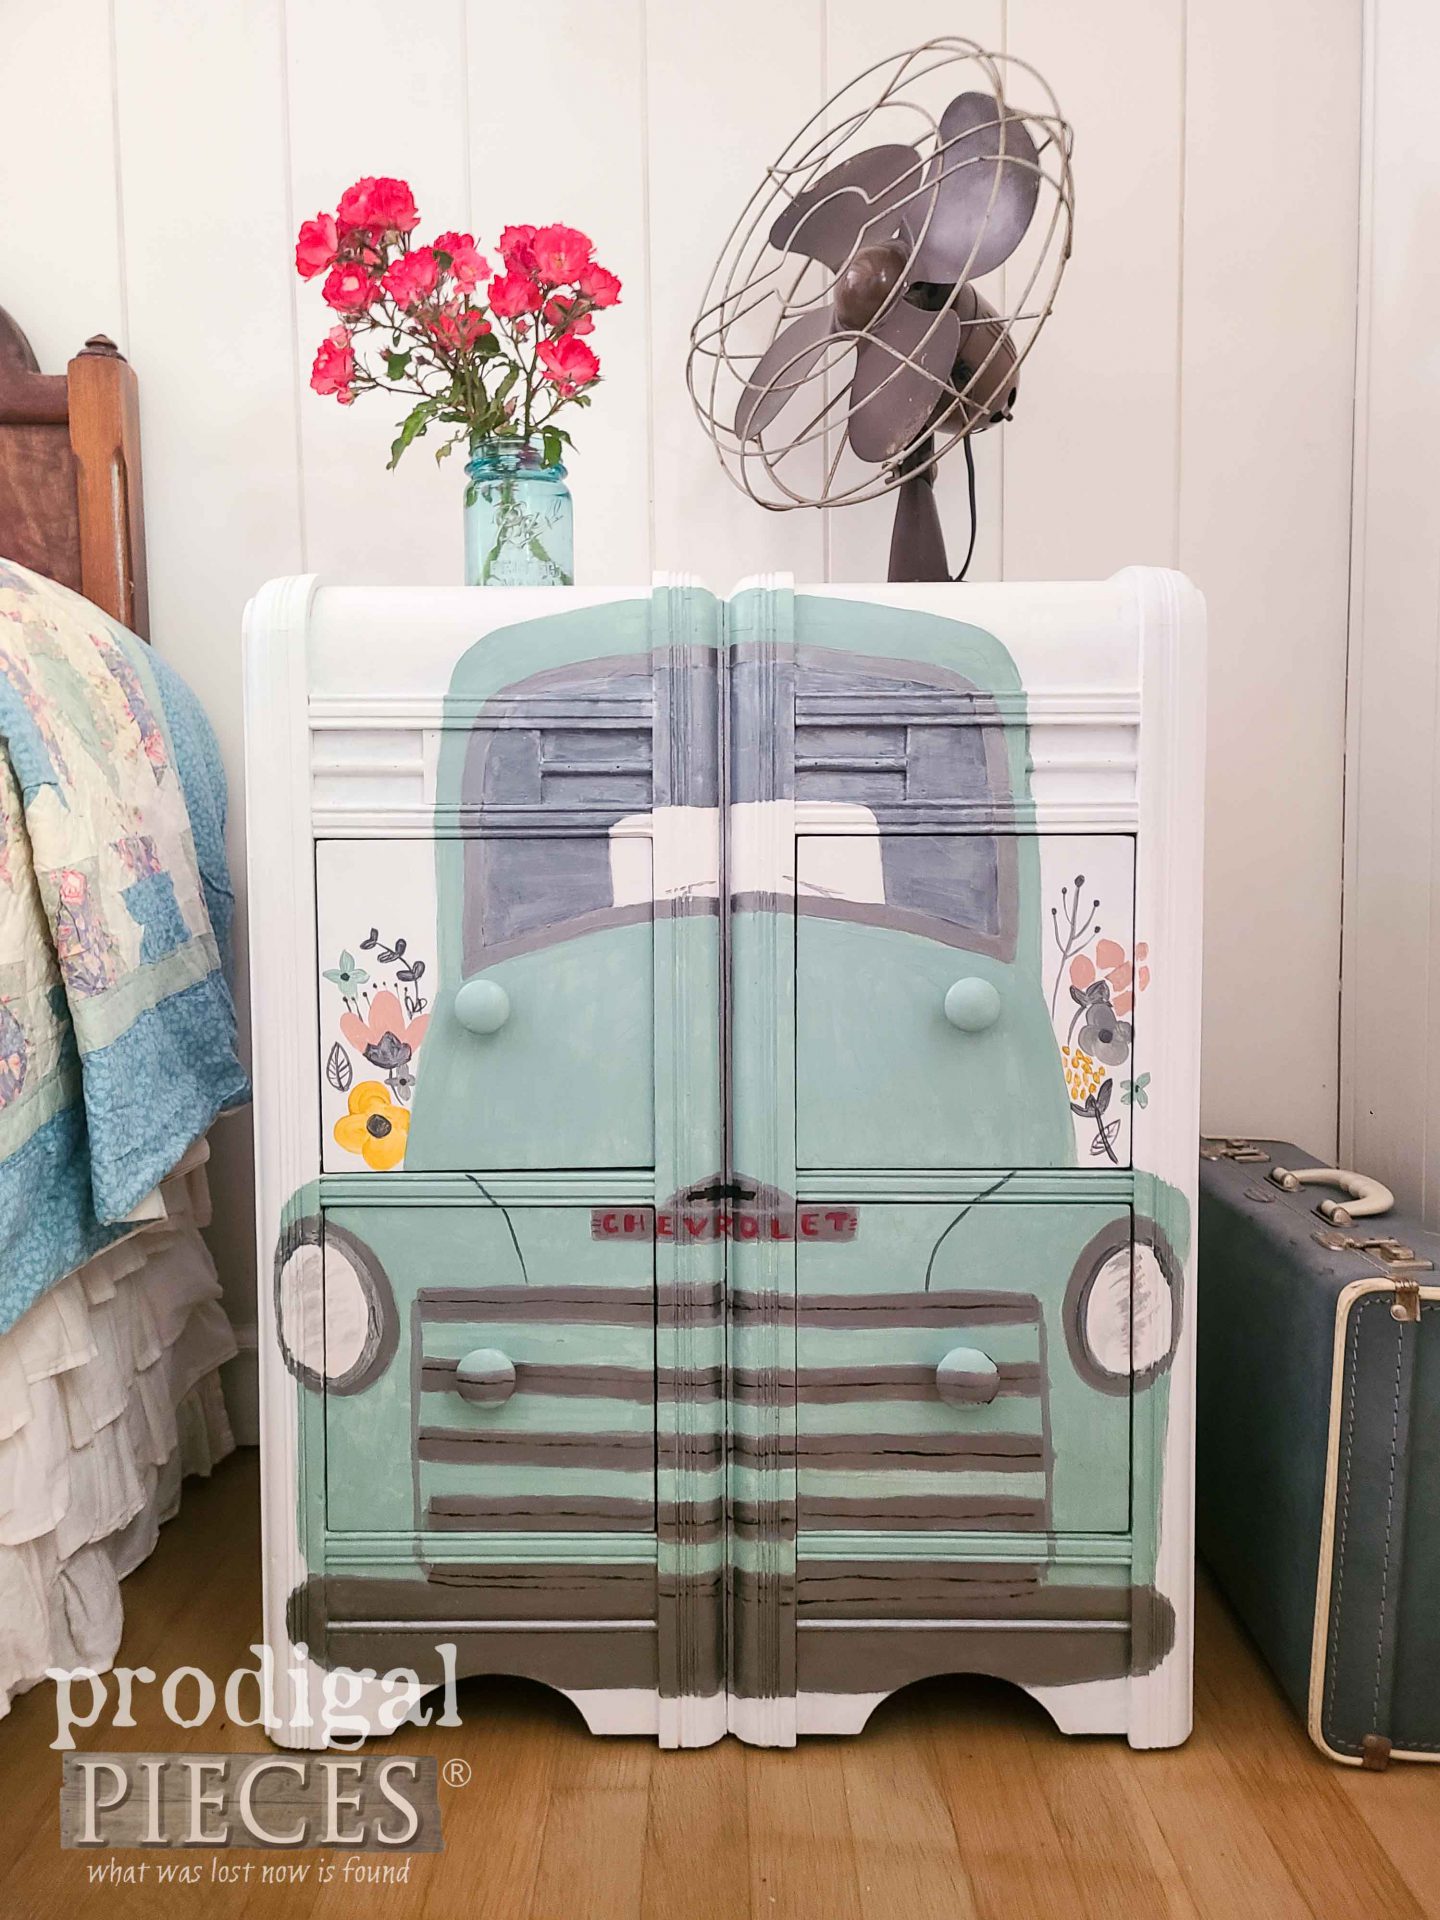 Vintage Truck Chest of Drawers from Repurposed Dressing Table by Larissa of Prodigal Pieces | prodigalpieces.com #prodigalpieces #vintage #diy #furniture #upcycled